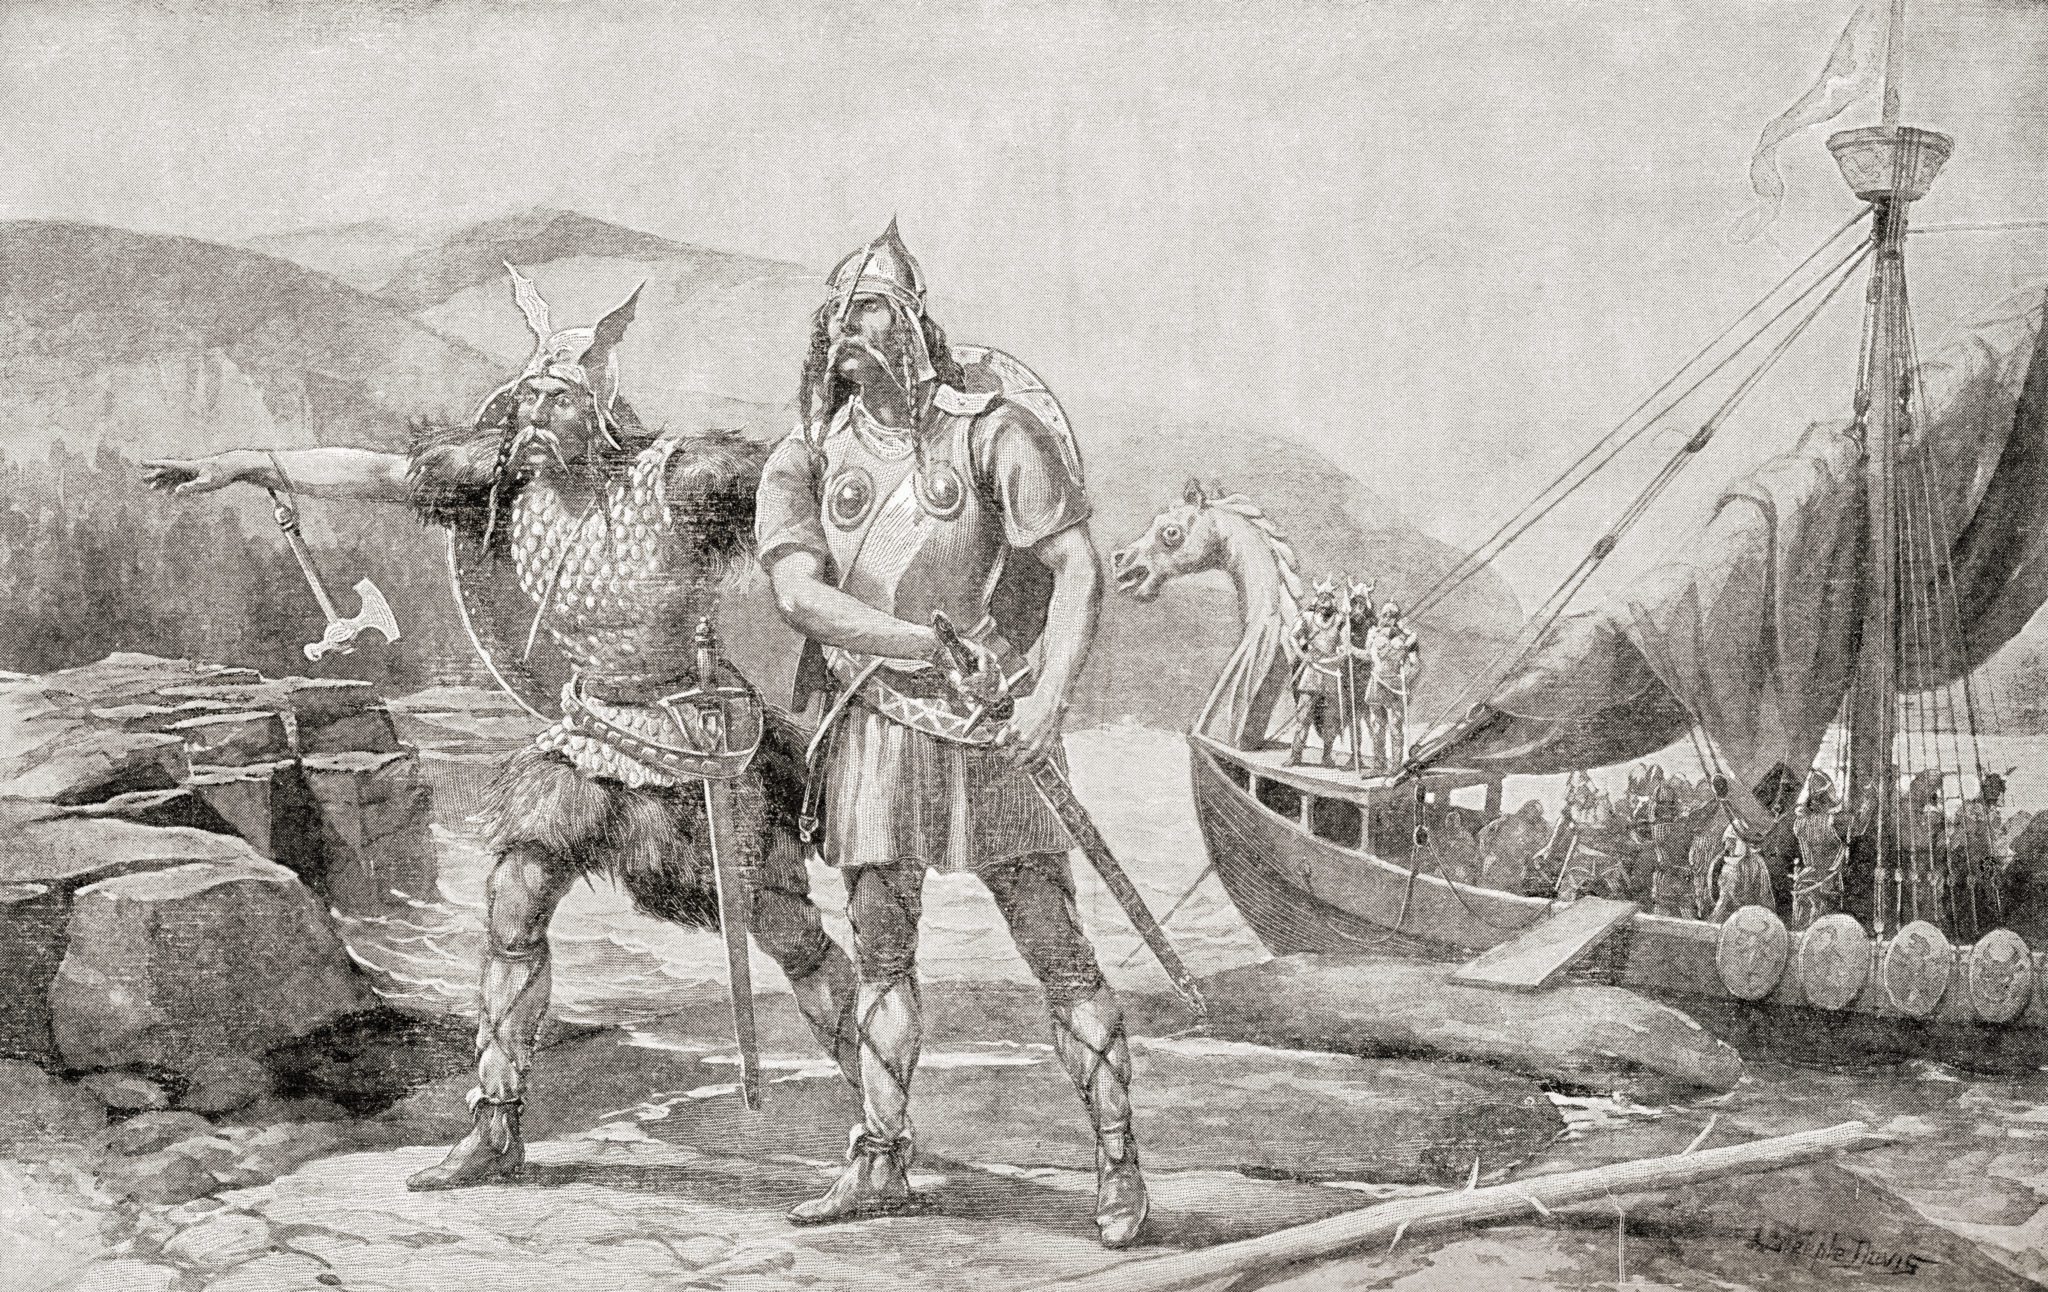 The landing of the Norsemen on the coast of North America in the 11th century